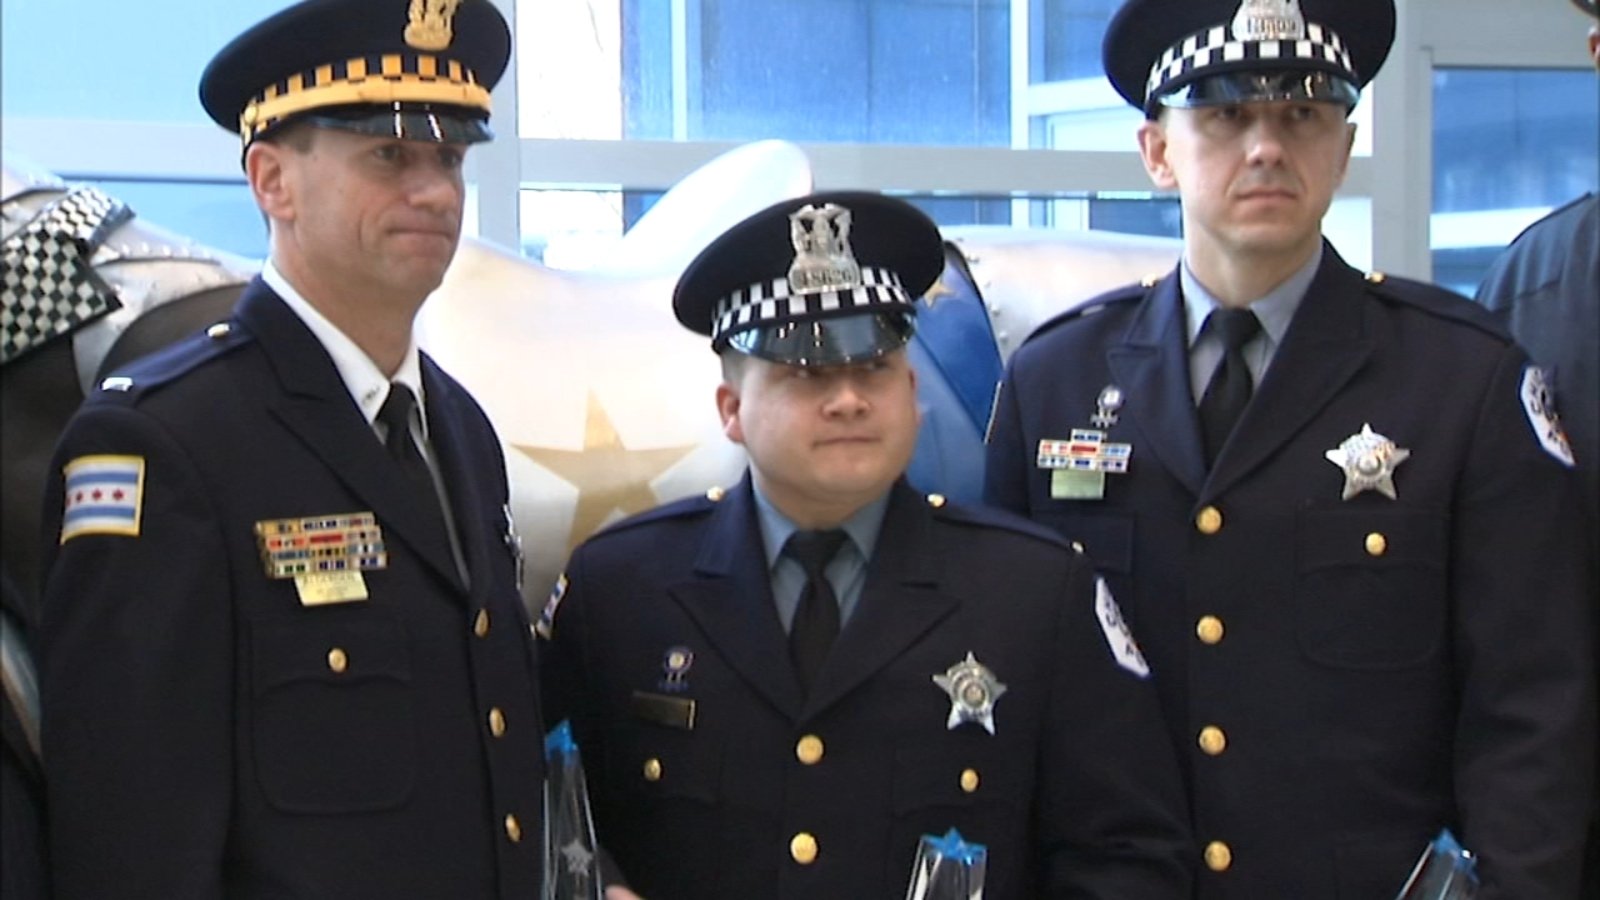 Chicago police officers honored for heroism during deadly ...